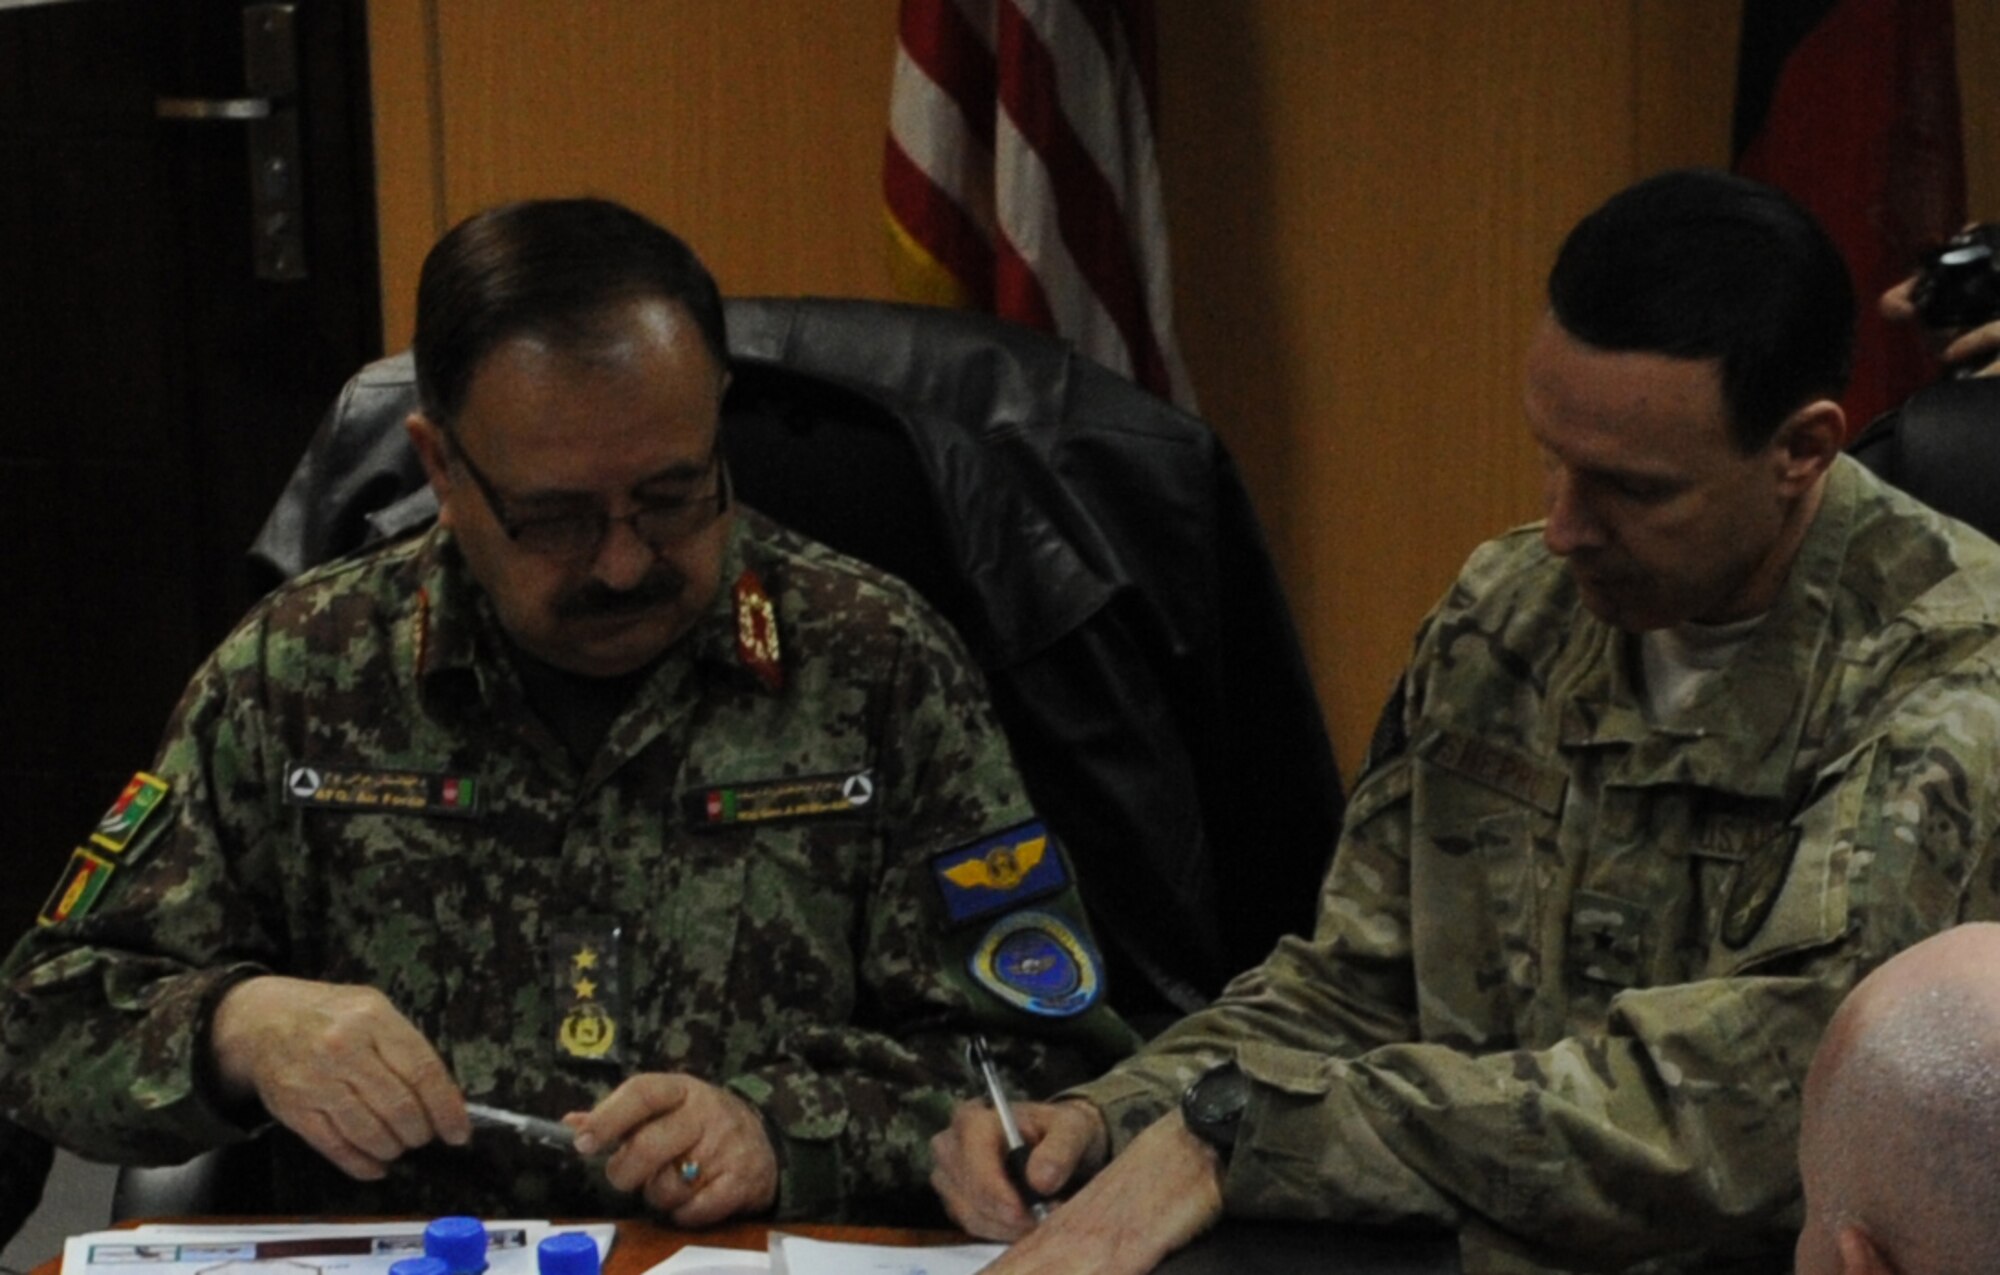 Maj. Gen. Abdul Wahab Wardak, commander of the Afghan Air Force, and Brig. Gen. Steven Shepro, commander of NATO Air Training Command-Afghanistan, sign two decrees Jan. 23, 2013 in NATC-A headquarters at the Kabul, Afghanistan, International Airport, implementing procedures to improve air response to Afghan battlefield casualties. The decrees address the high-priority missions of evacuation of wounded personnel (CASEVAC) and the dignified, culturally-appropriate transfer of fallen members of Afghan National Security Forces. (U.S. Air Force photo/Capt. Agneta Murnan)